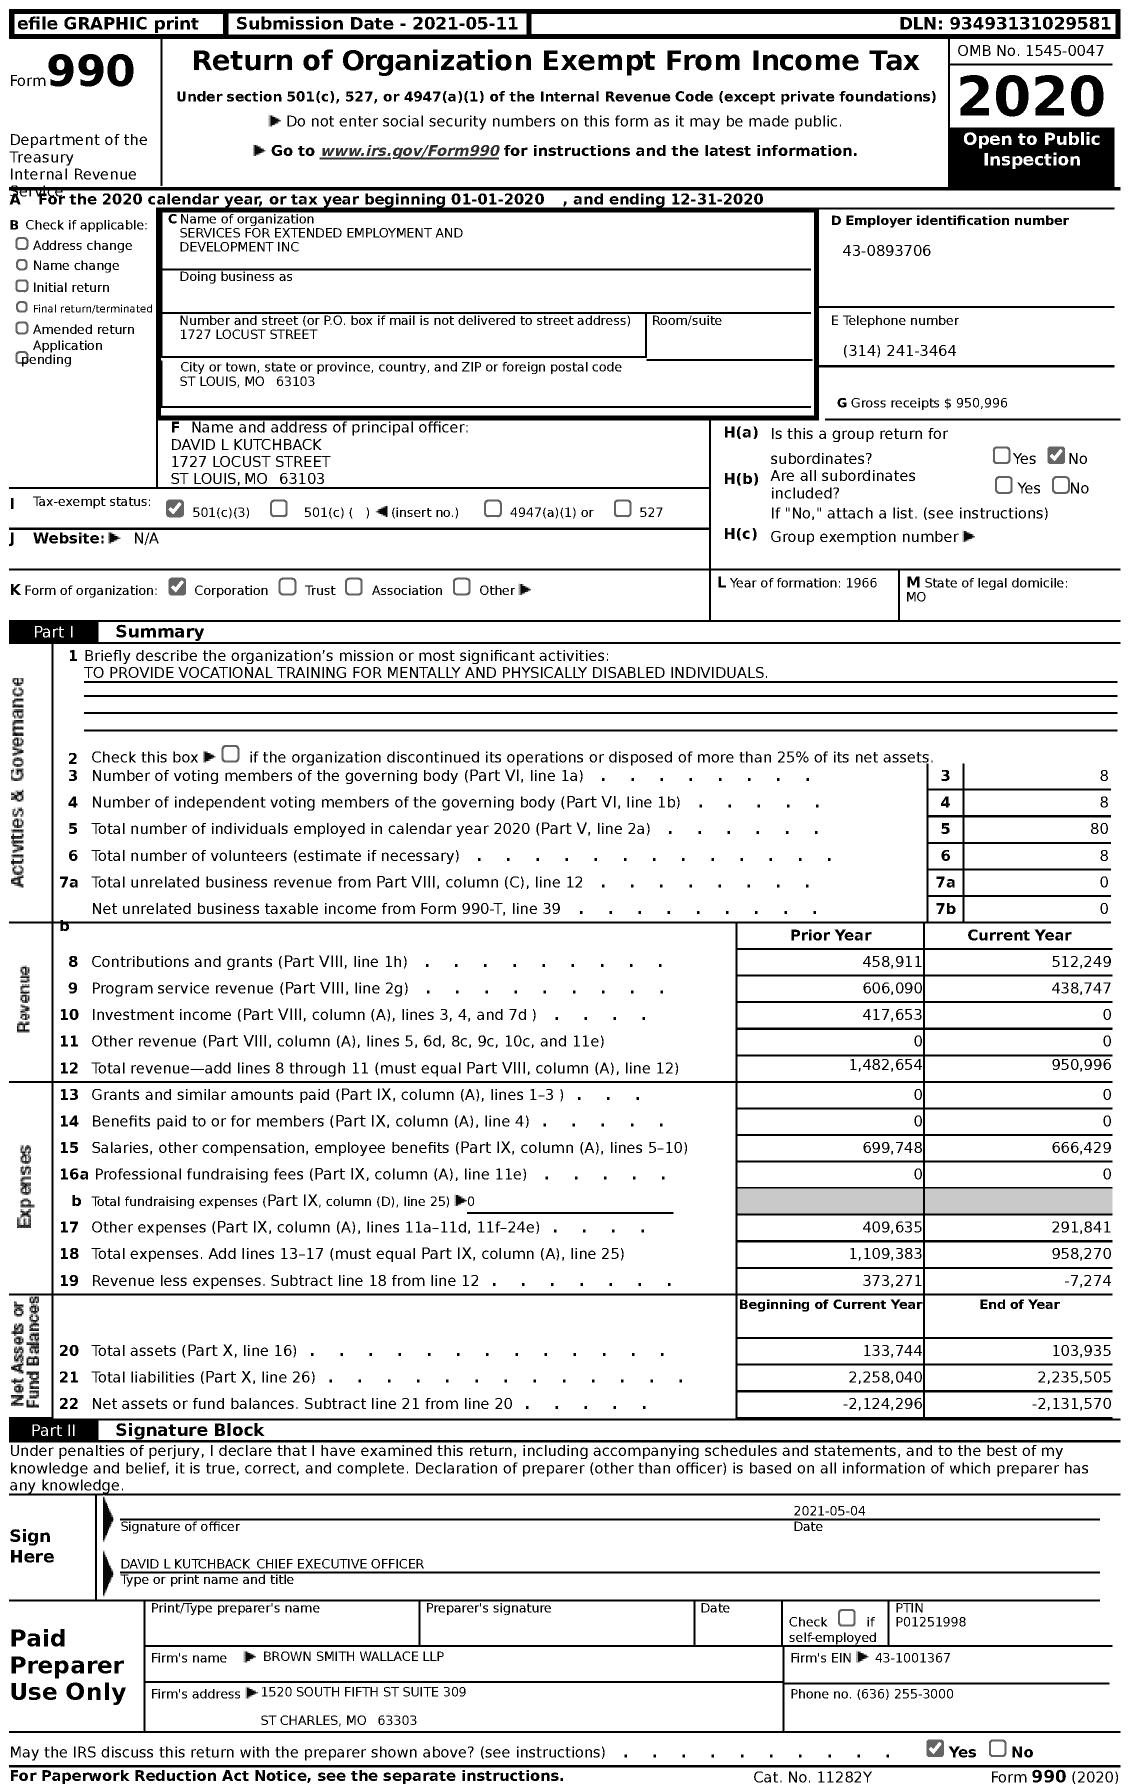 Image of first page of 2020 Form 990 for Services for Extended Employment and Development